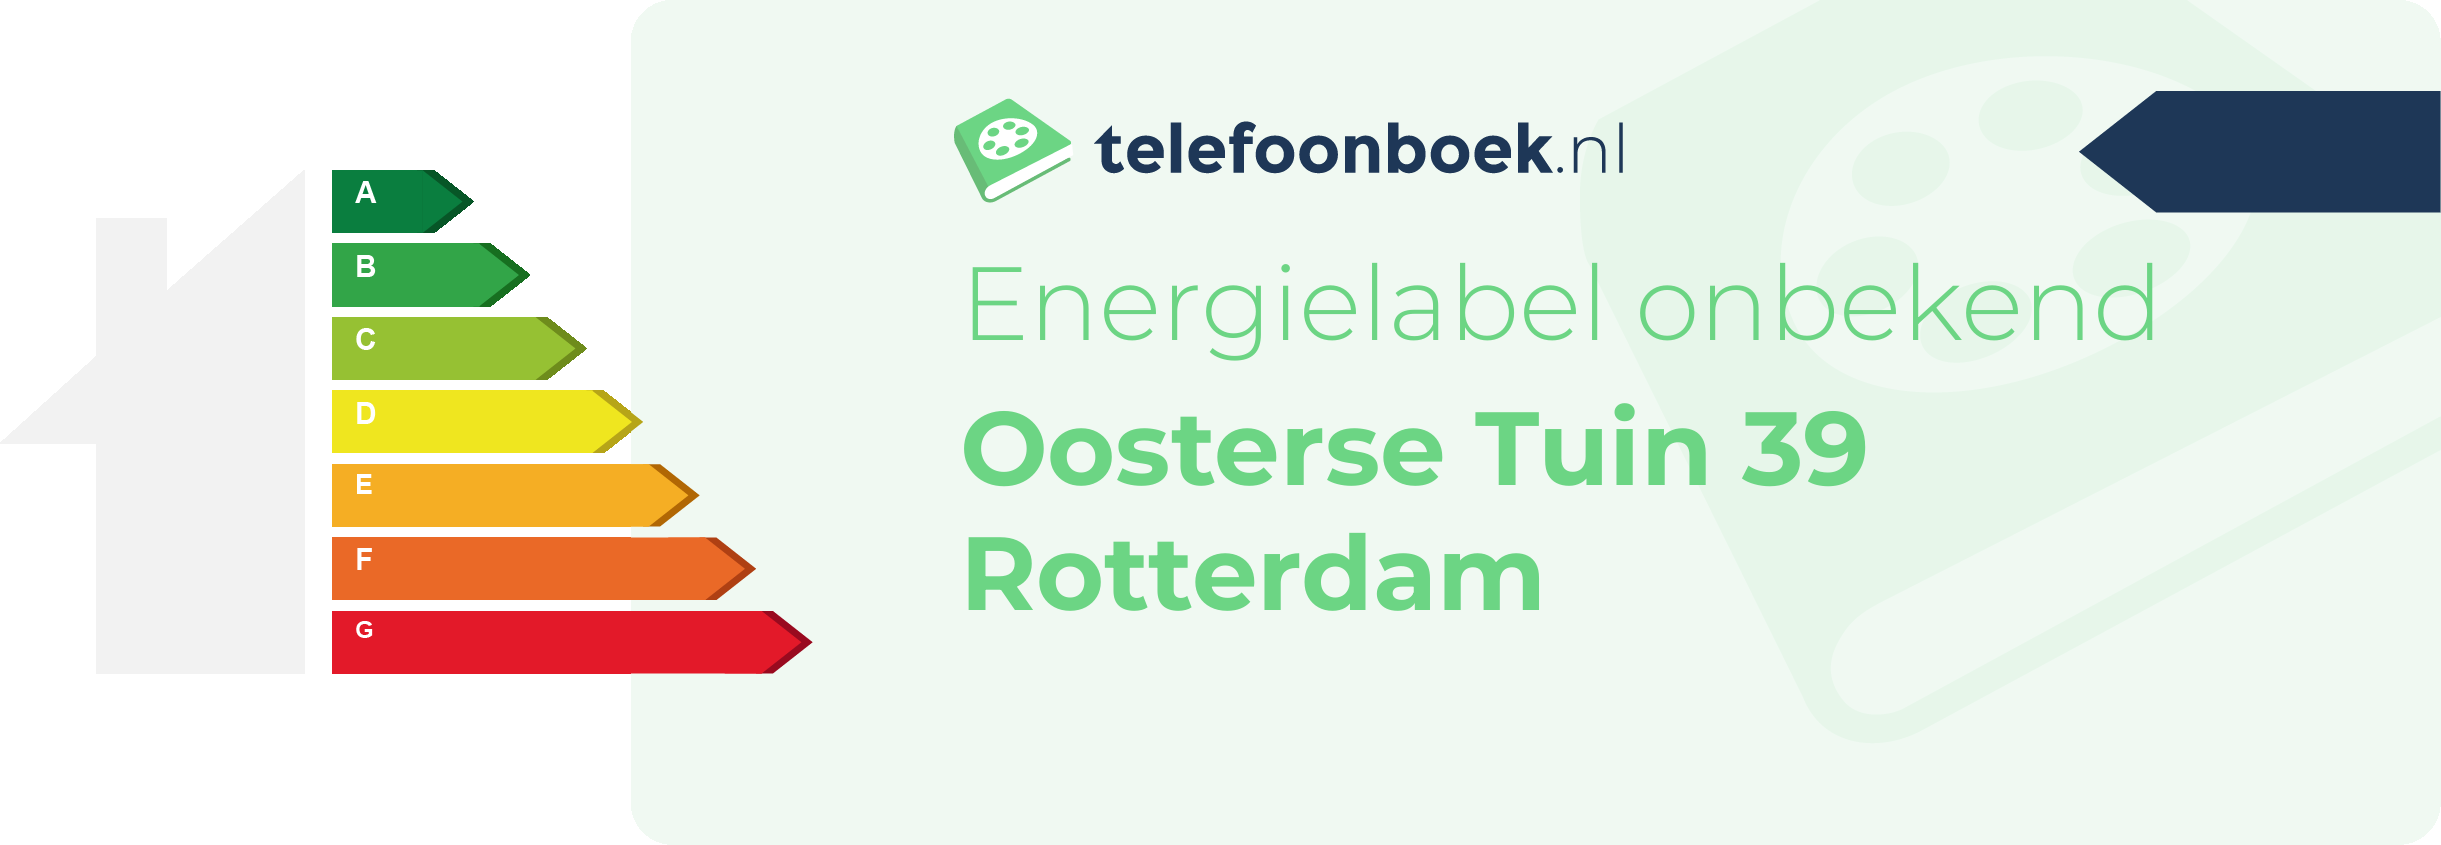 Energielabel Oosterse Tuin 39 Rotterdam